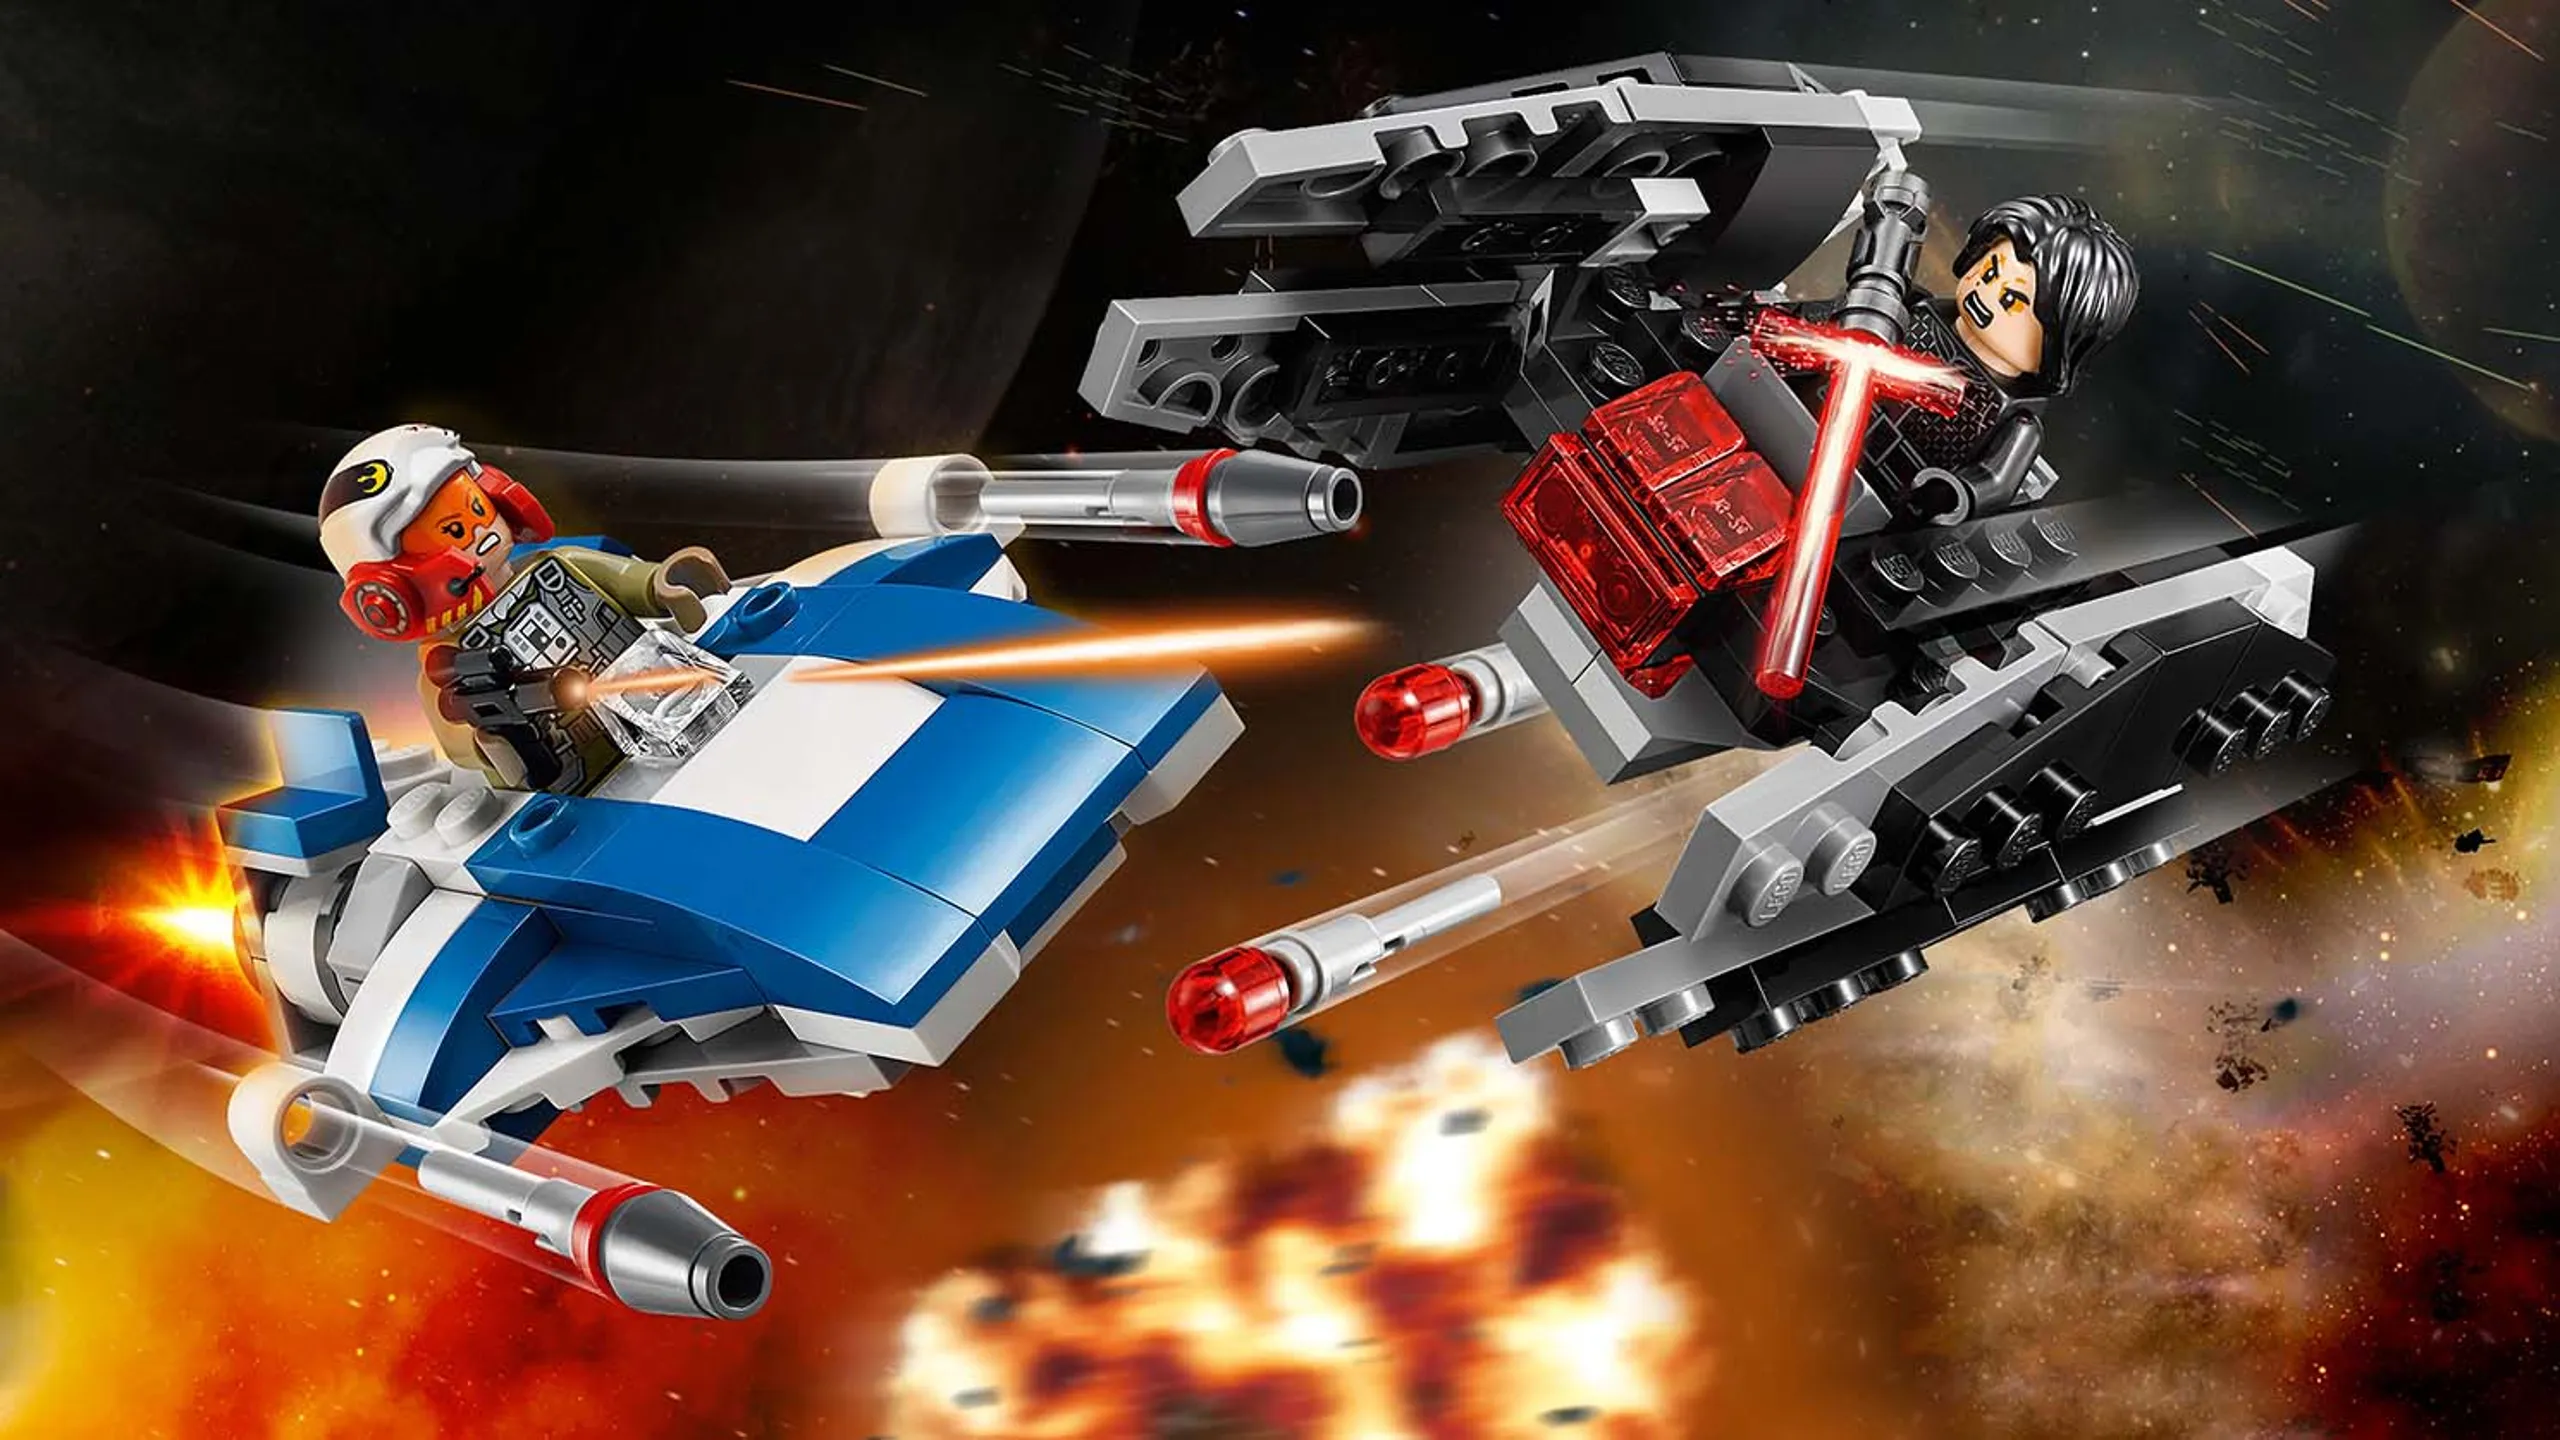 LEGO Star Wars A-Wing™ vs. TIE Silencer™ Microfighters - 75196 - Kylo Ren’s TIE Silencer and the Resistance A-wing in a deep space microfighter duel!